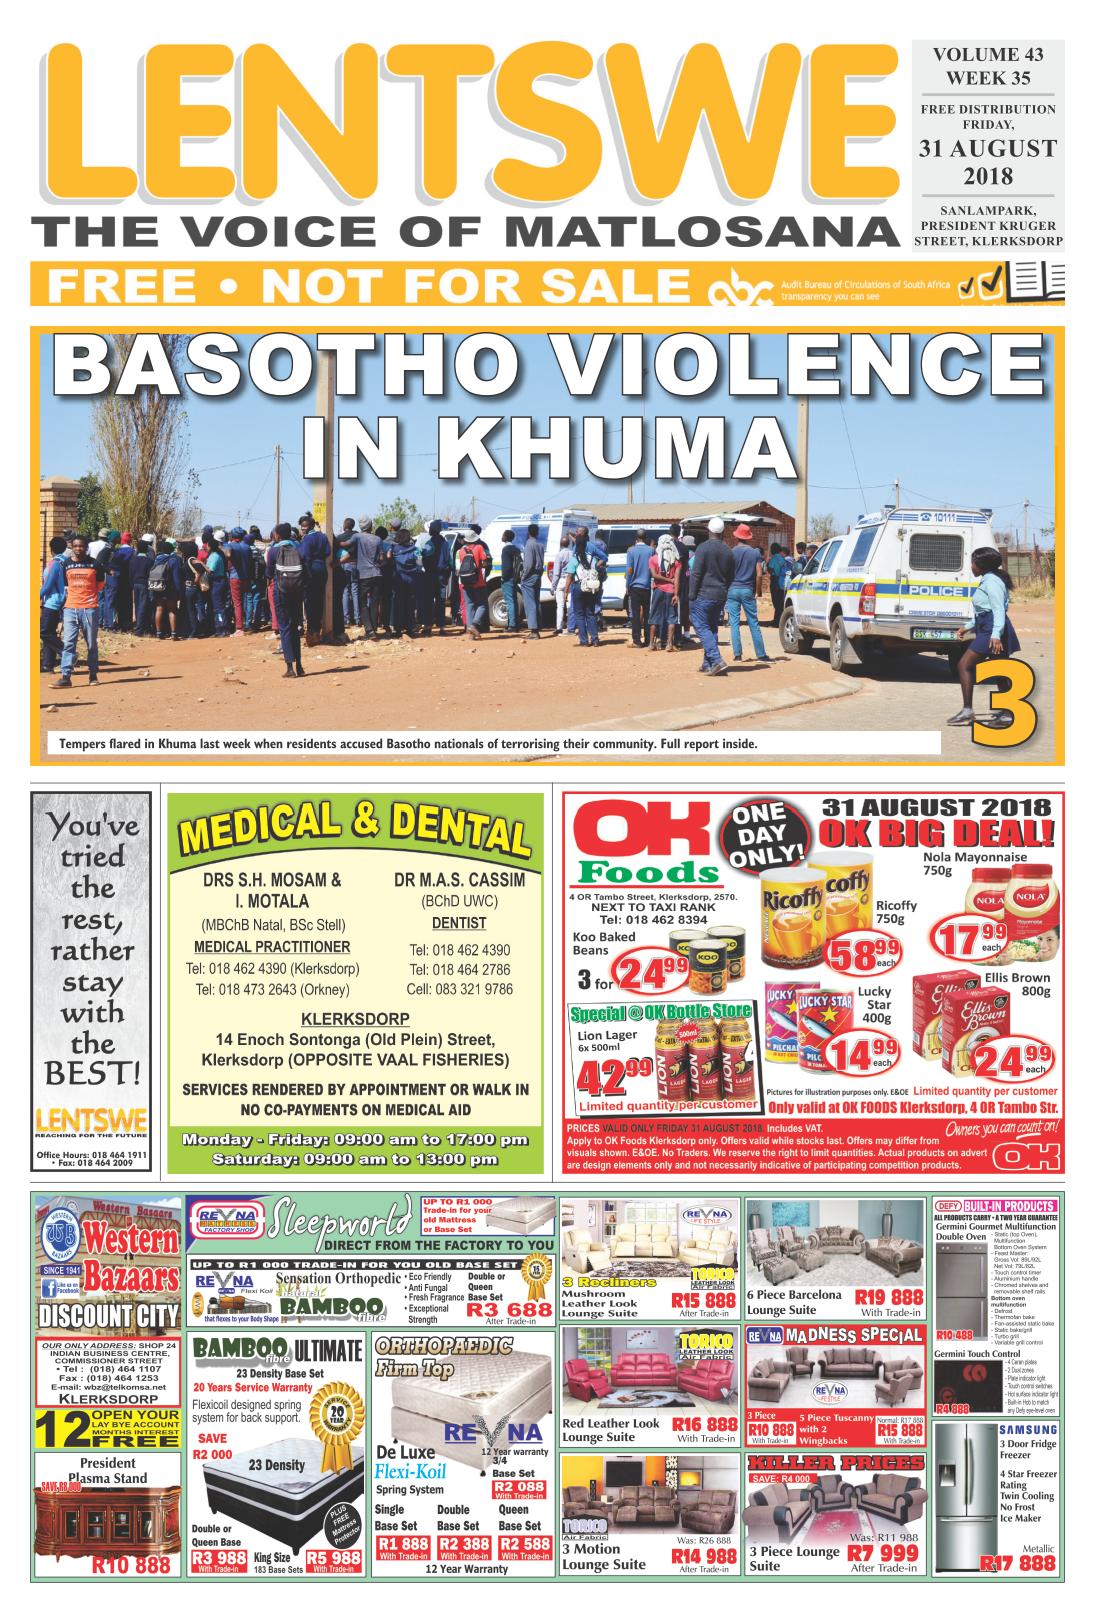 Frontpage